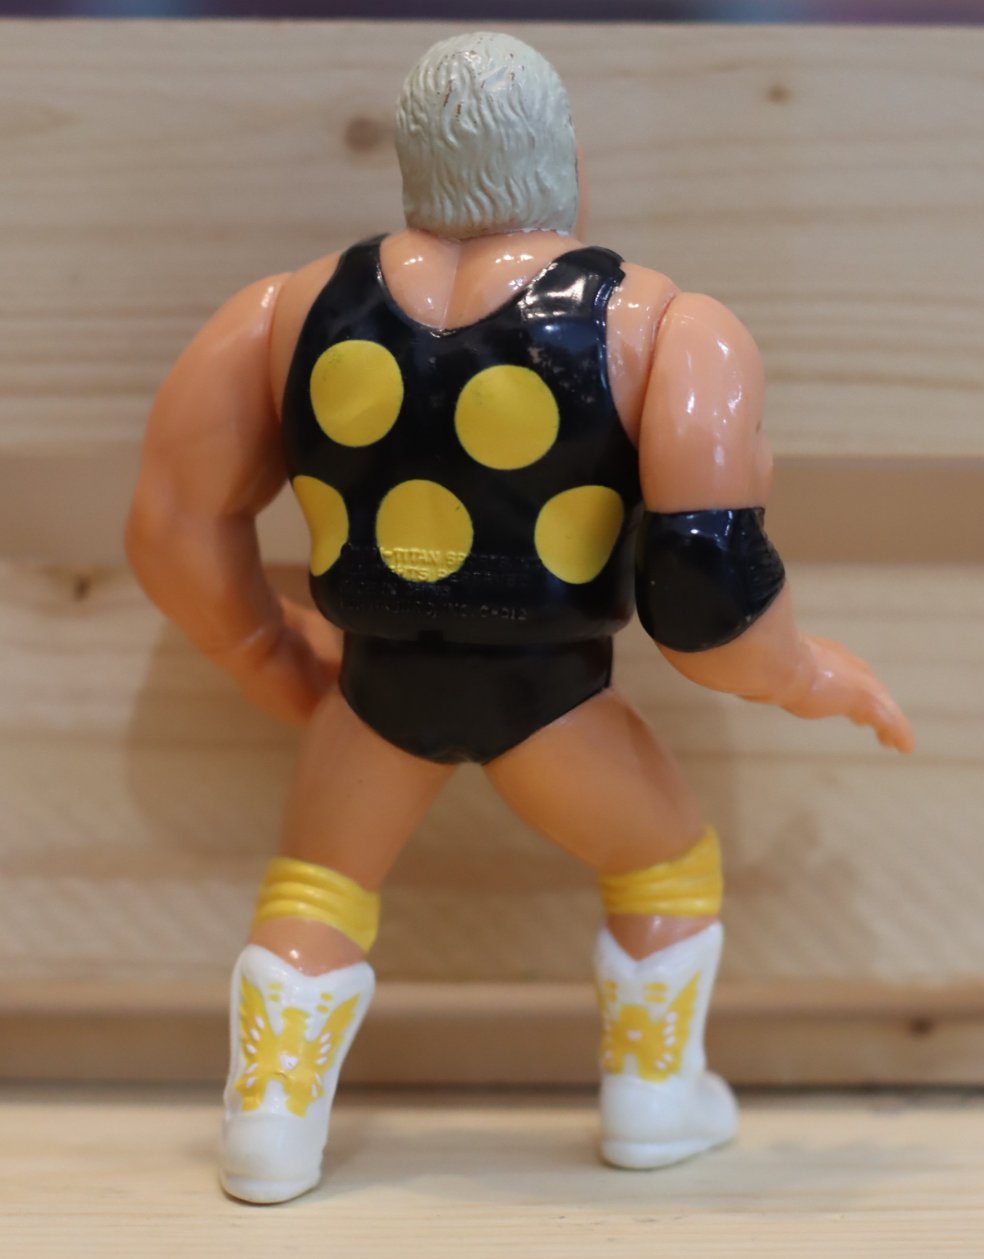 1992 Hasbro Dusty Rhodes Moving Arms Loose WWF Wrestling Figure - Great Shape!